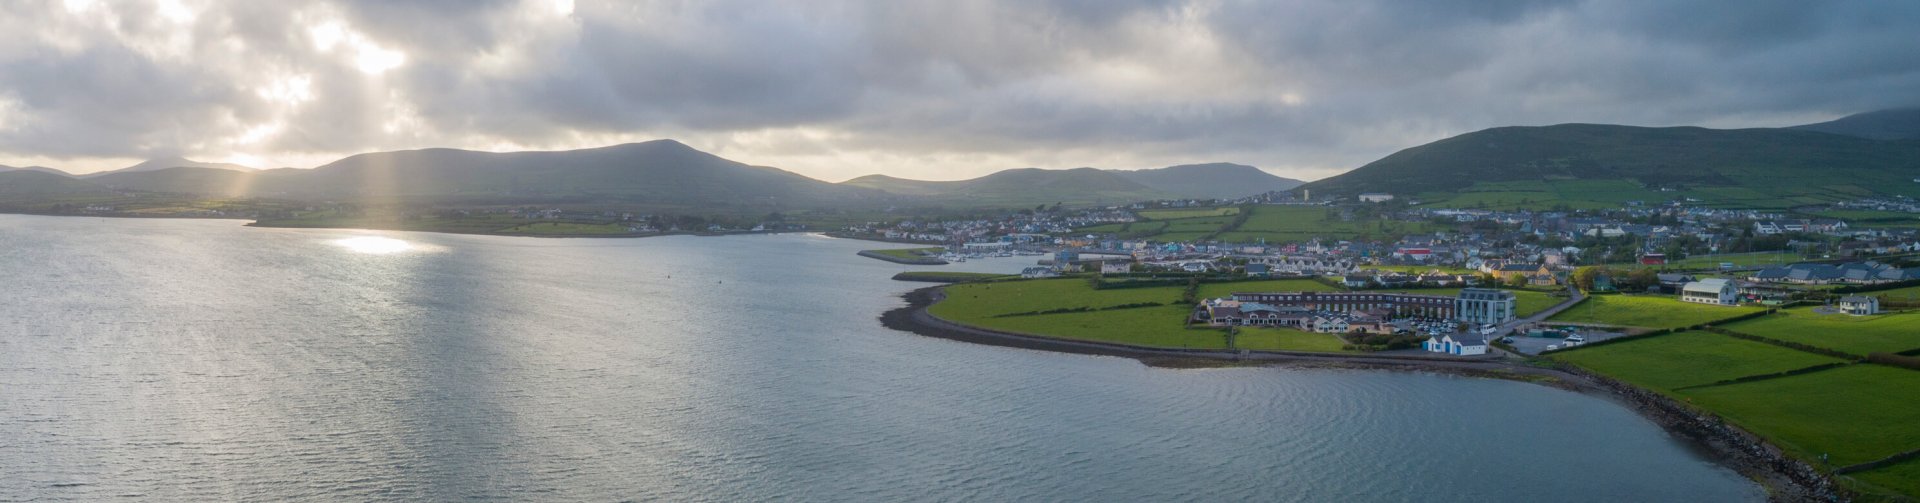 Scenic drone shot of Dingle Bay and Dingle Skellig Hotel in Ireland